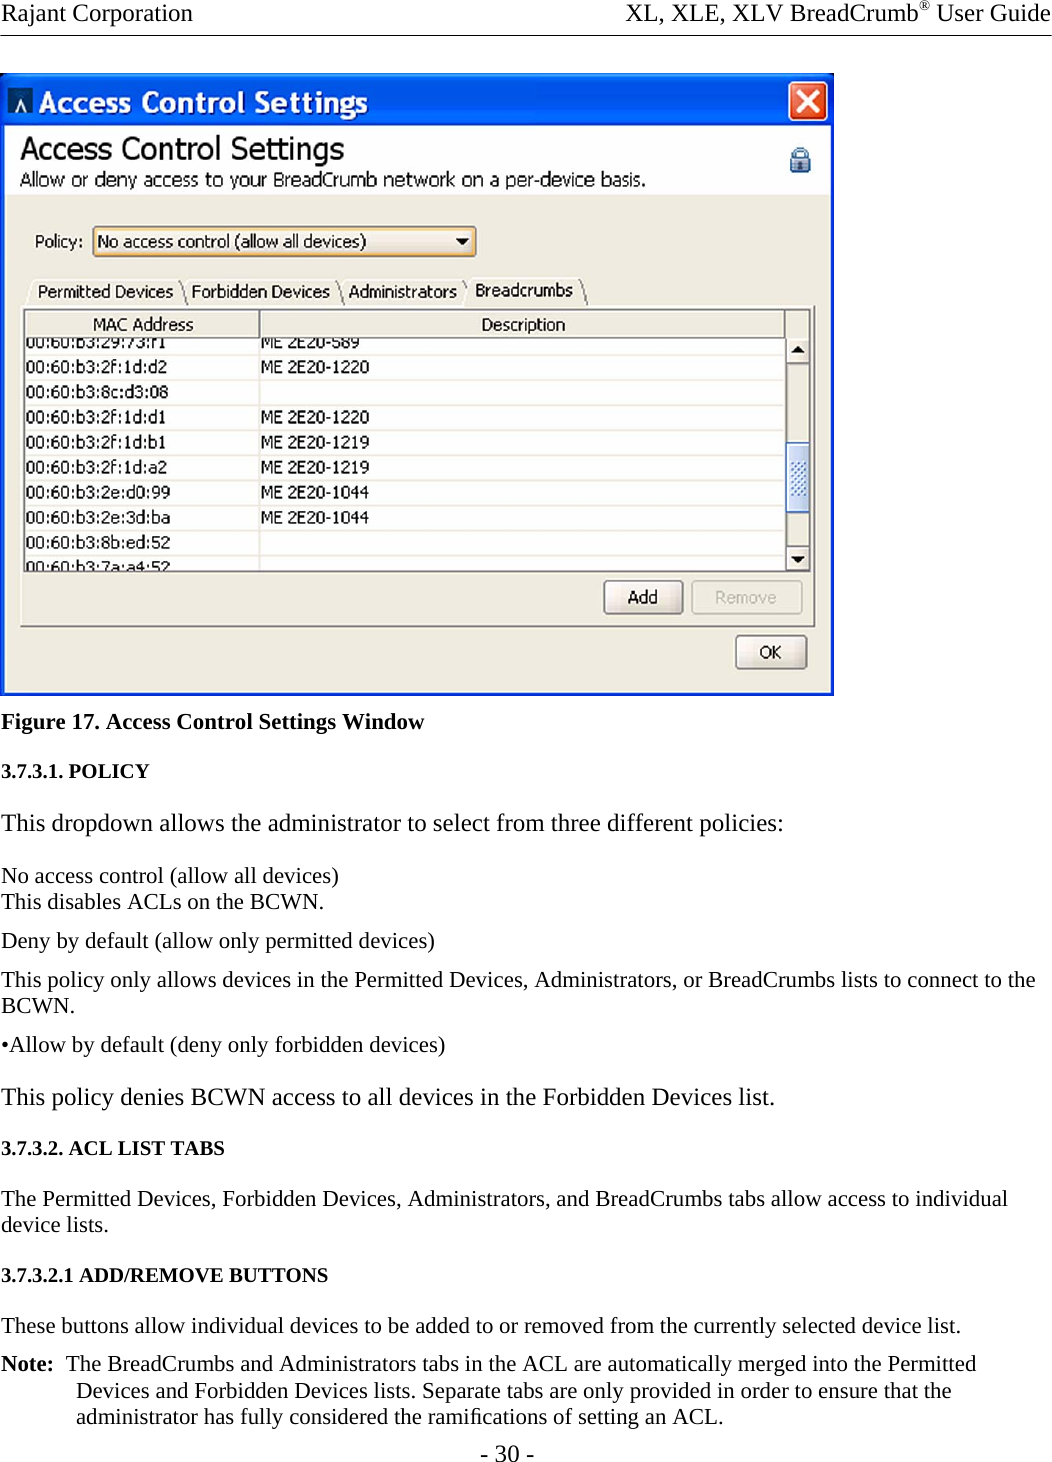 Rajant Corporation    XL, XLE, XLV BreadCrumb® User Guide  Figure 17. Access Control Settings Window 3.7.3.1. POLICY This dropdown allows the administrator to select from three different policies: No access control (allow all devices) This disables ACLs on the BCWN. Deny by default (allow only permitted devices)  This policy only allows devices in the Permitted Devices, Administrators, or BreadCrumbs lists to connect to the BCWN.  •Allow by default (deny only forbidden devices) This policy denies BCWN access to all devices in the Forbidden Devices list. 3.7.3.2. ACL LIST TABS  The Permitted Devices, Forbidden Devices, Administrators, and BreadCrumbs tabs allow access to individual device lists.  3.7.3.2.1 ADD/REMOVE BUTTONS  These buttons allow individual devices to be added to or removed from the currently selected device list.  Note:  The BreadCrumbs and Administrators tabs in the ACL are automatically merged into the Permitted Devices and Forbidden Devices lists. Separate tabs are only provided in order to ensure that the administrator has fully considered the ramiﬁcations of setting an ACL.  - 30 - 